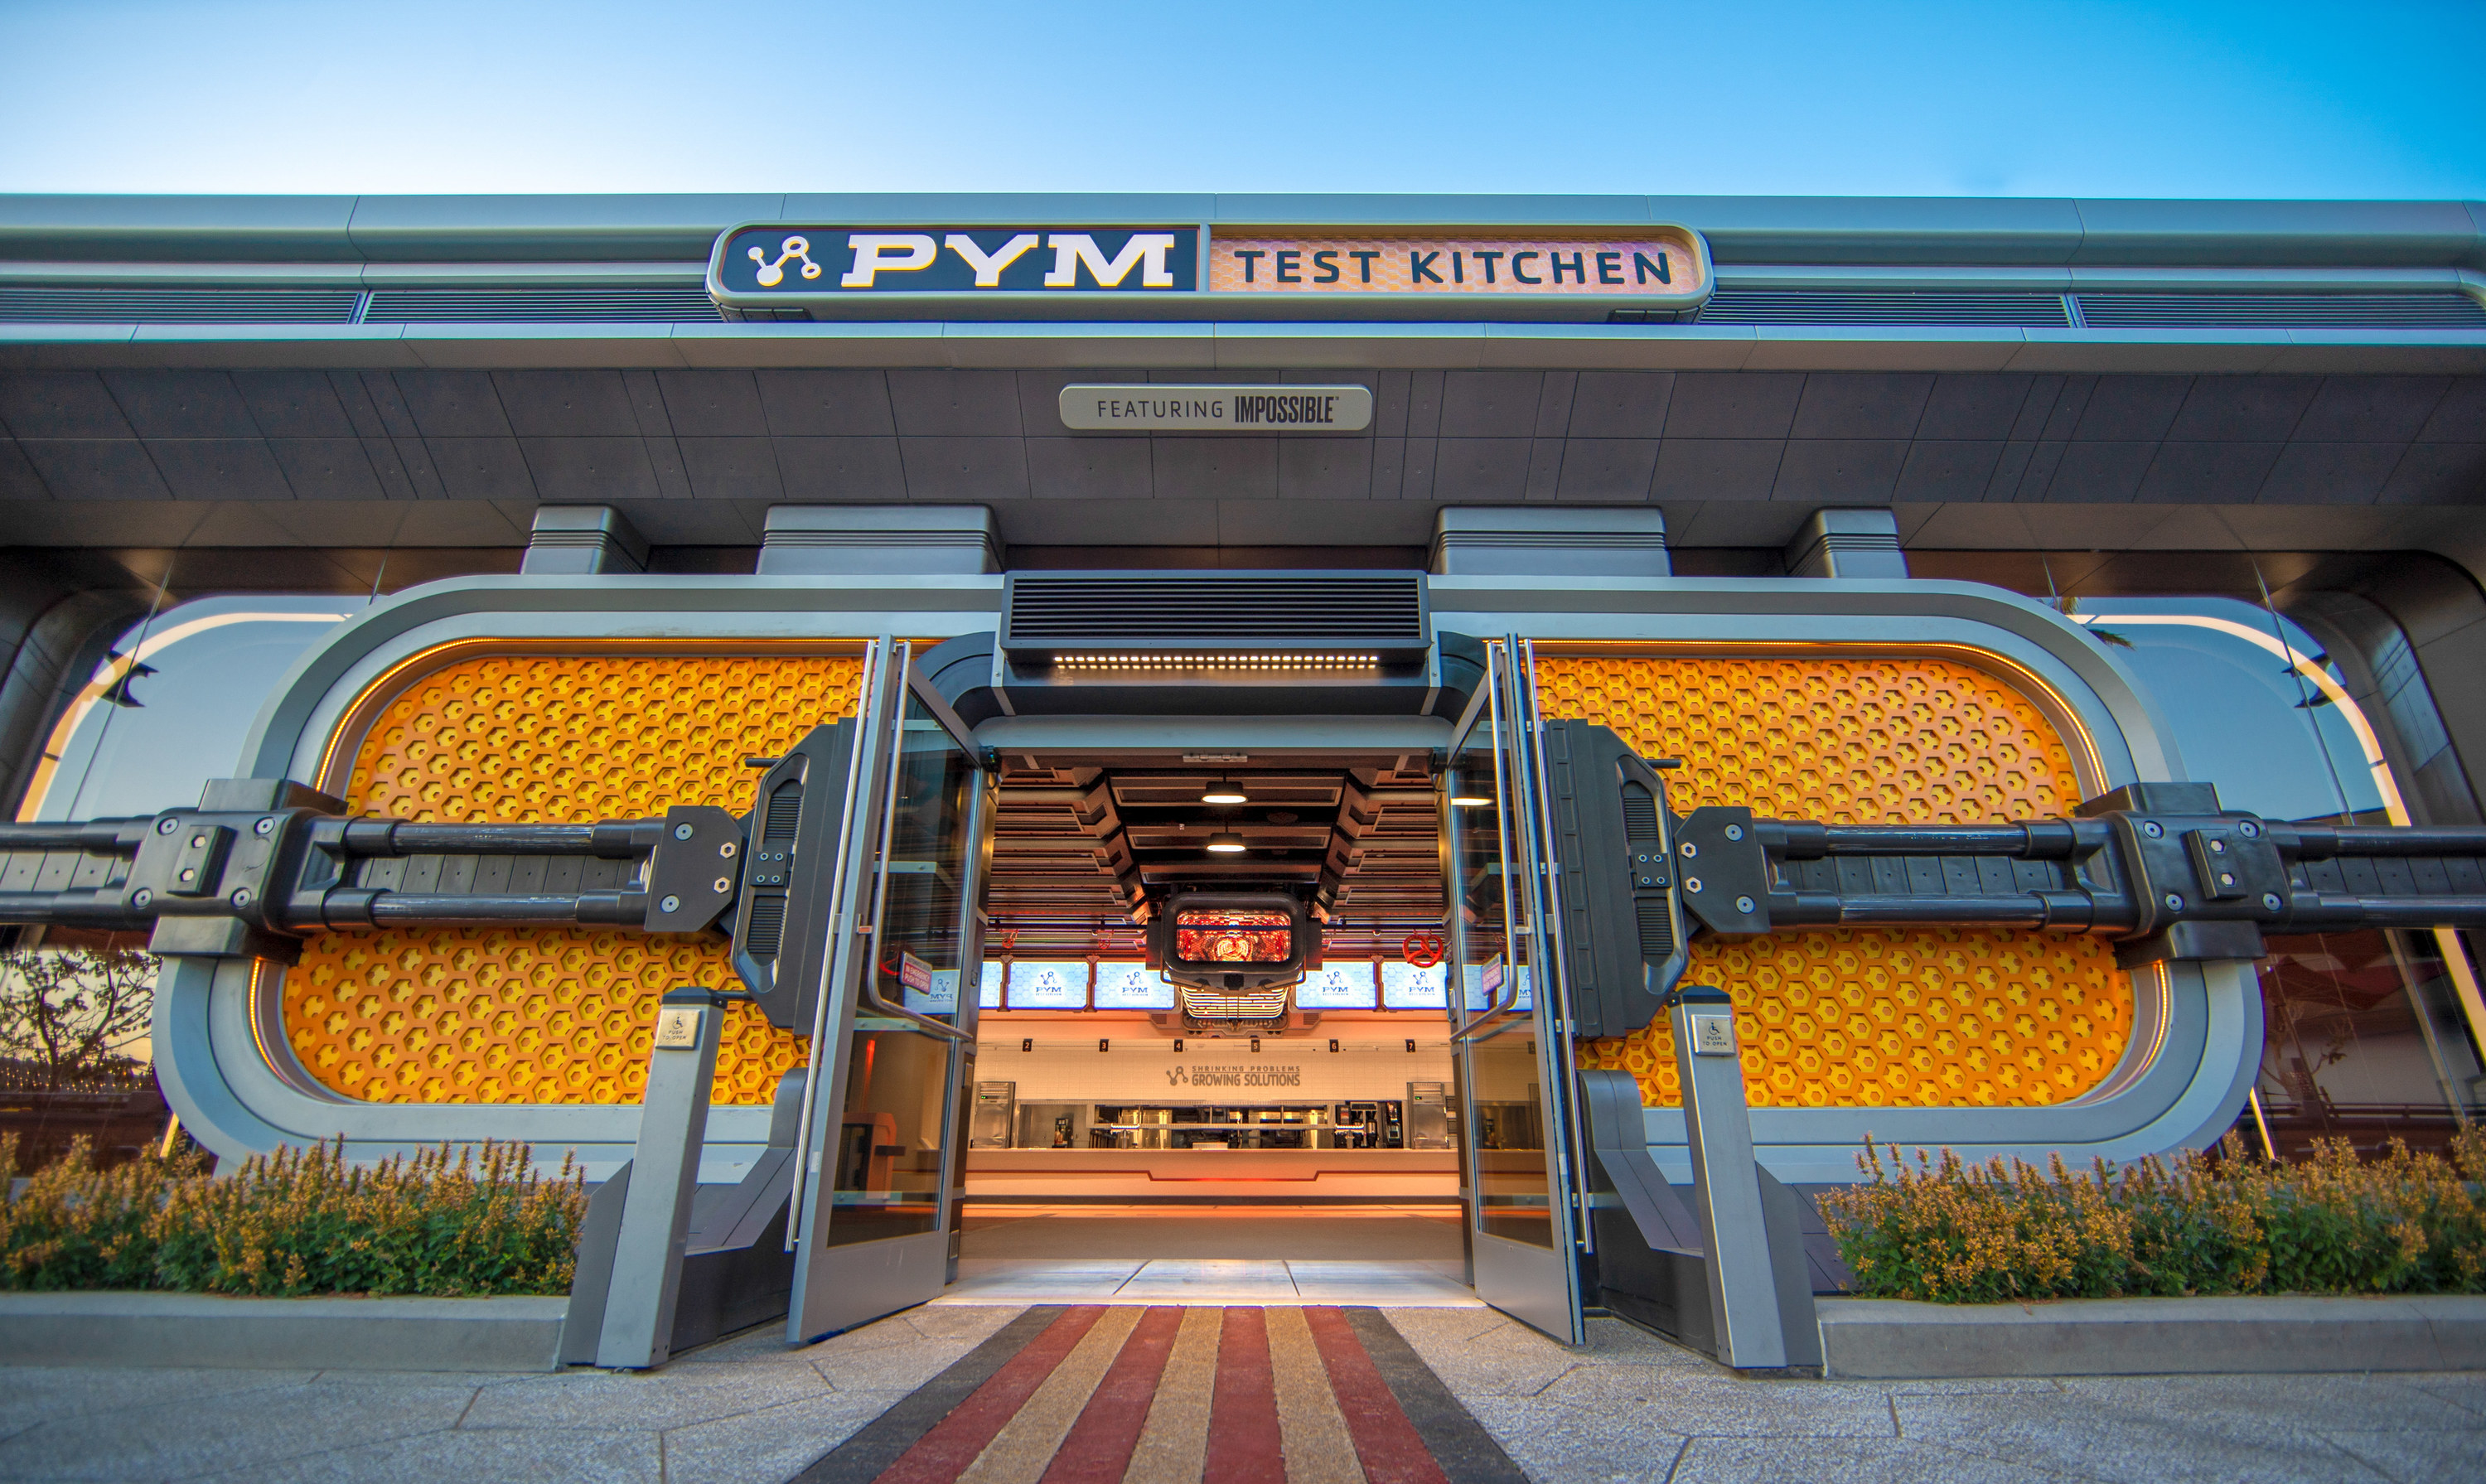 The entrance of Pym Test Kitchen, which is made of a lot of metal and has wide open doors 